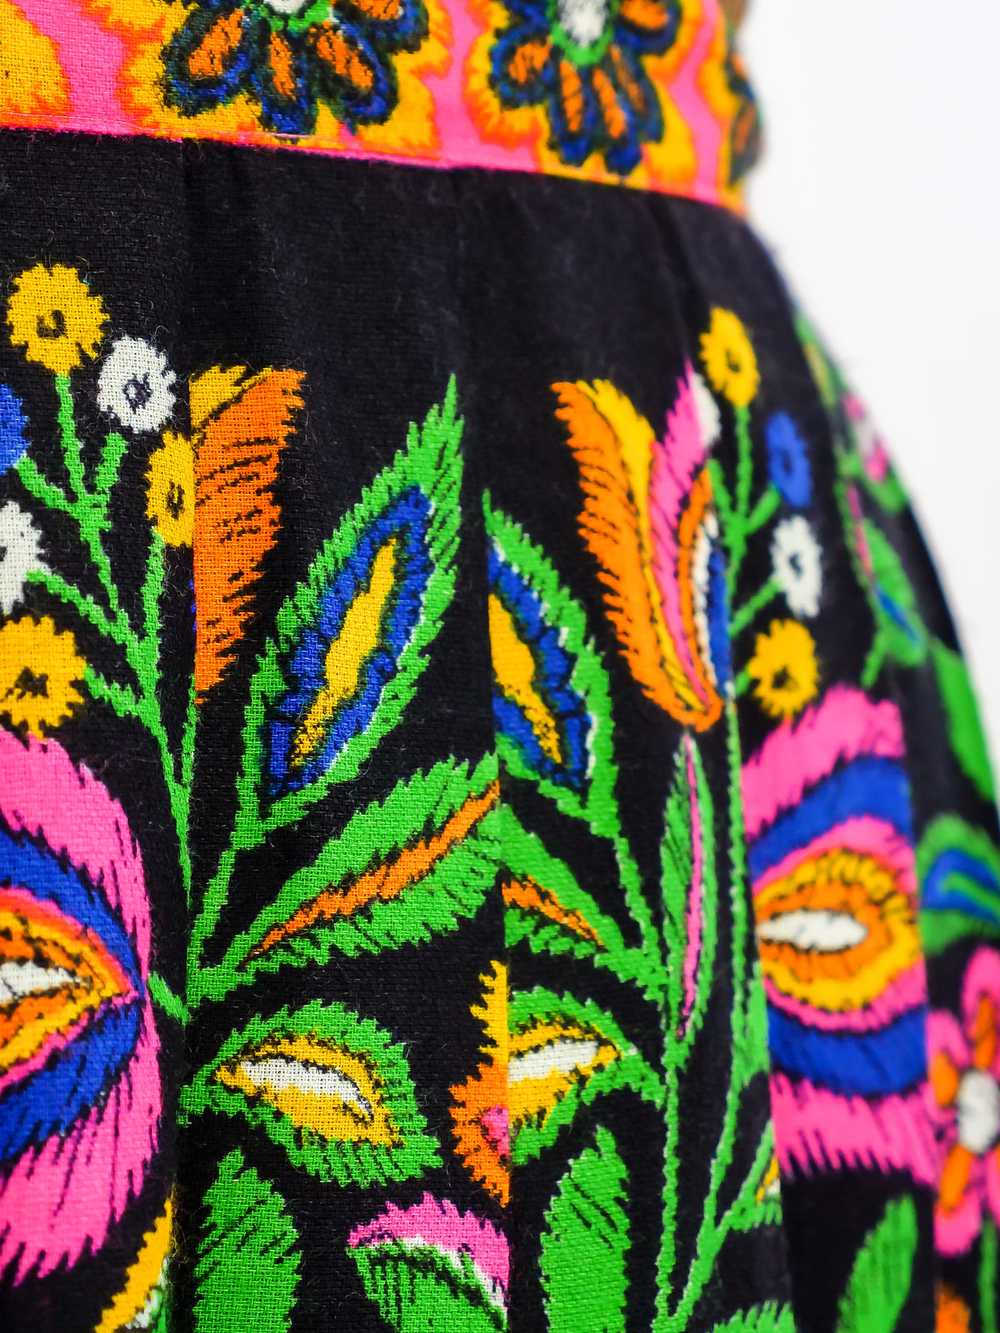 Psychedelic Floral Printed Skirt - image 4